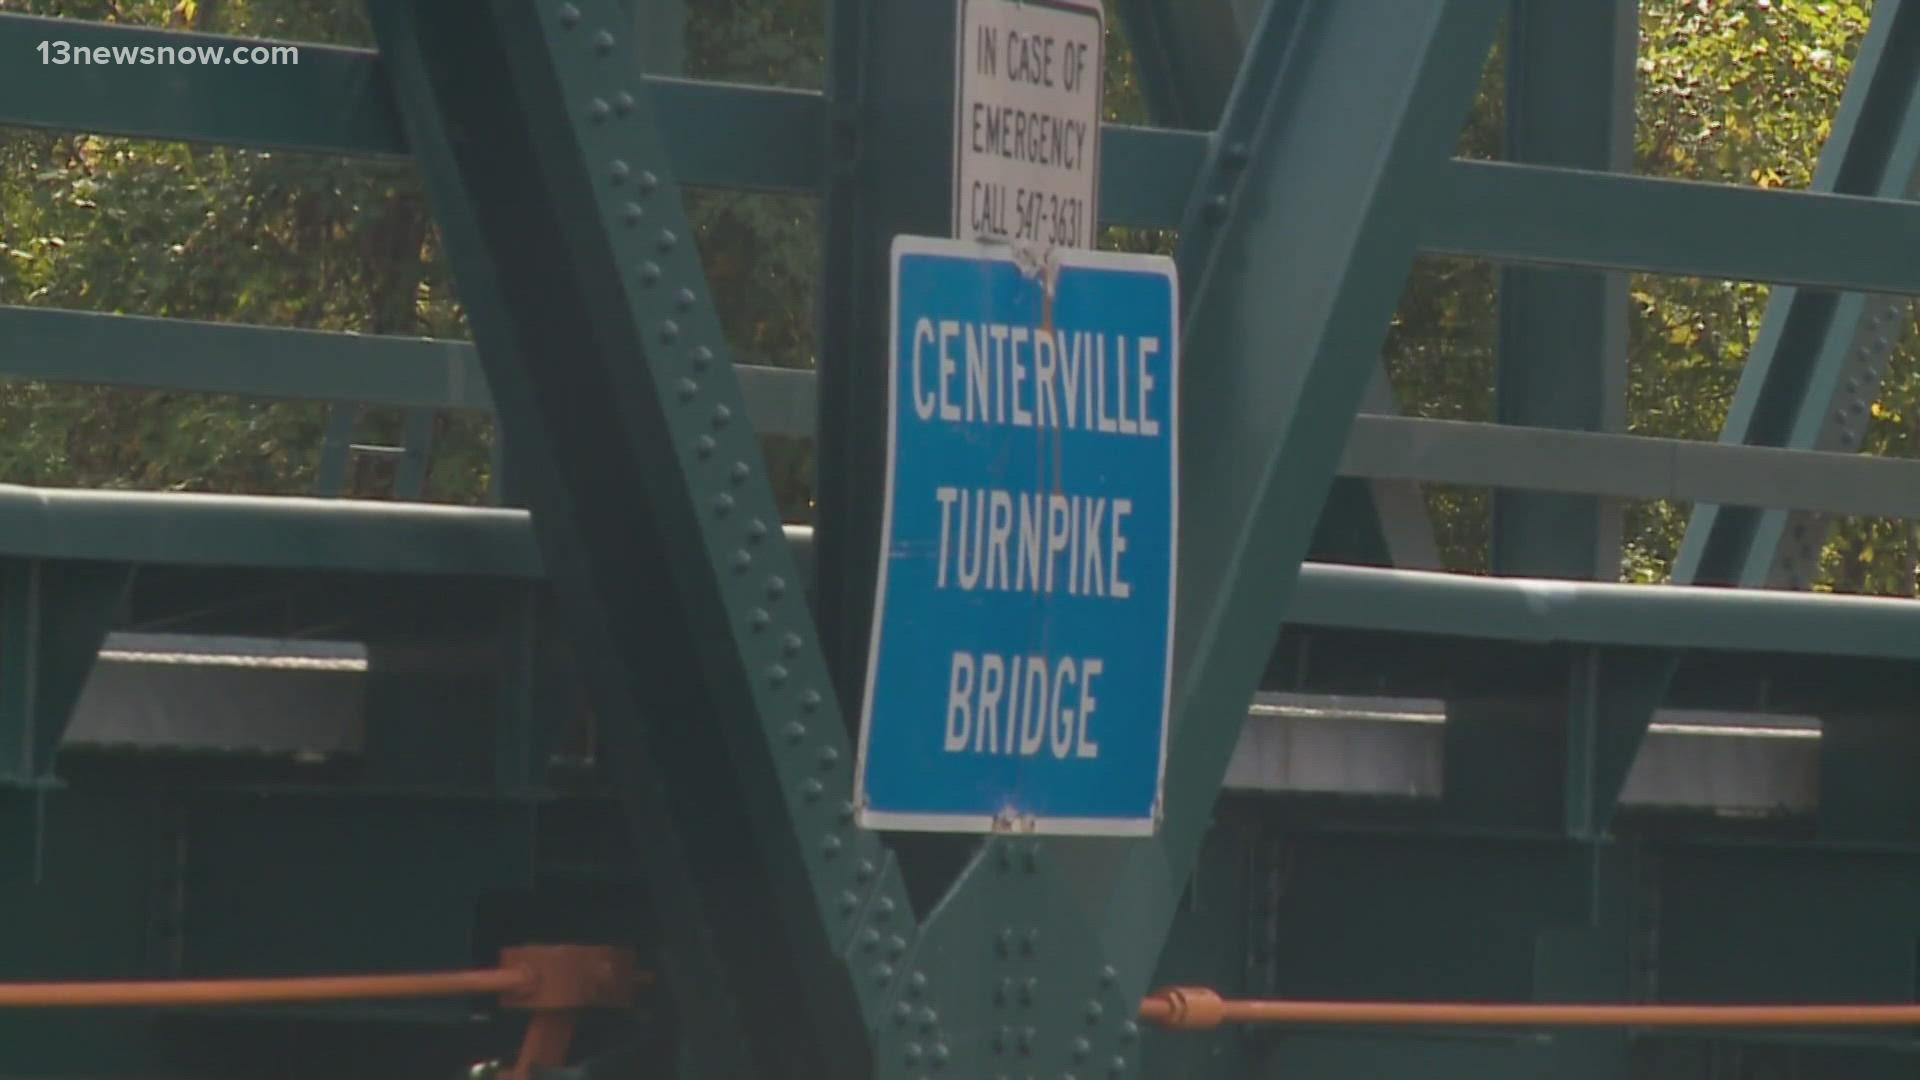 Chesapeake officials Community shows support for highrise bridge in